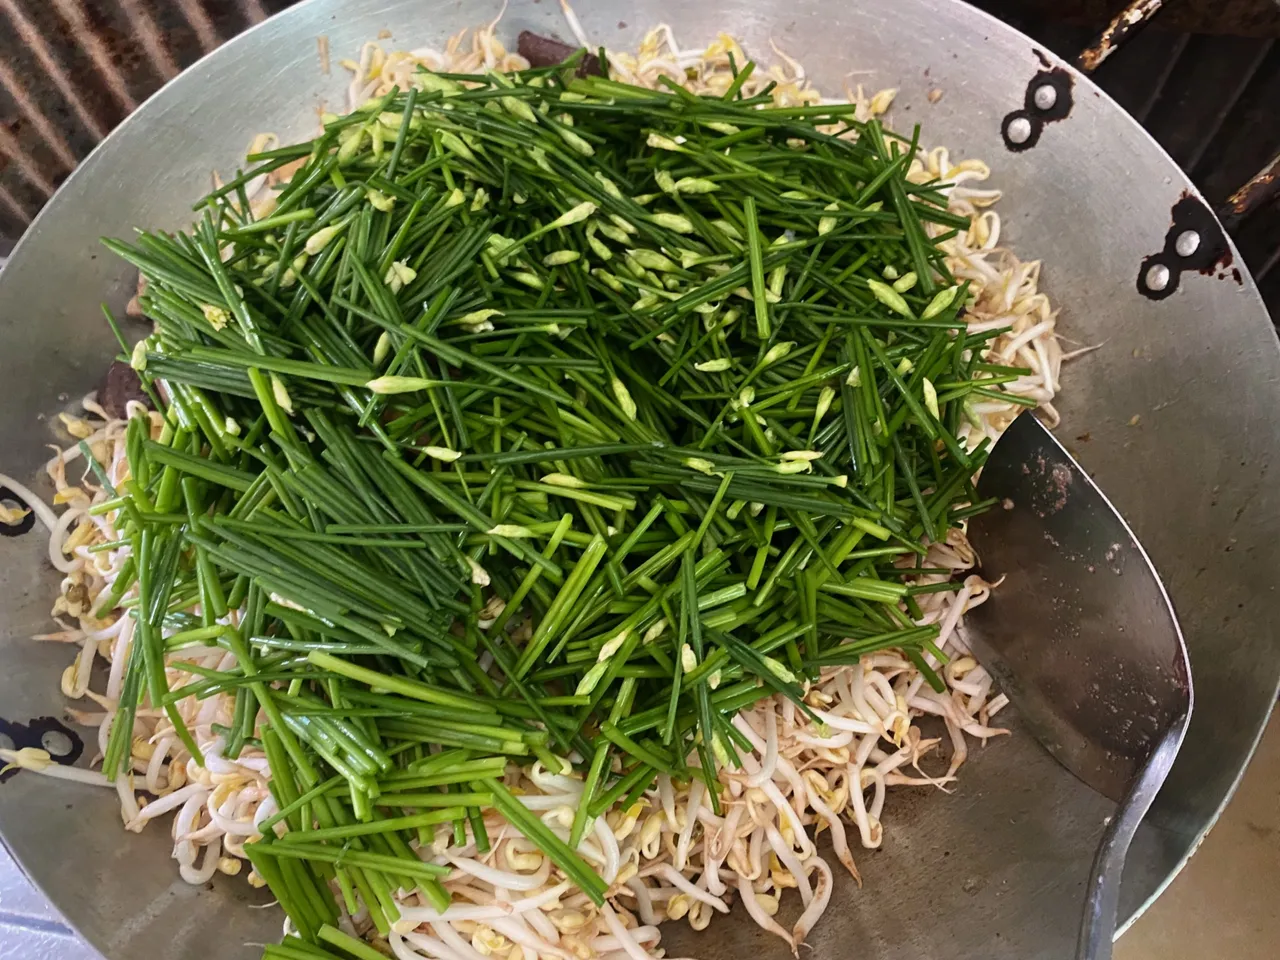 Garlic chives stirring with bean spouts